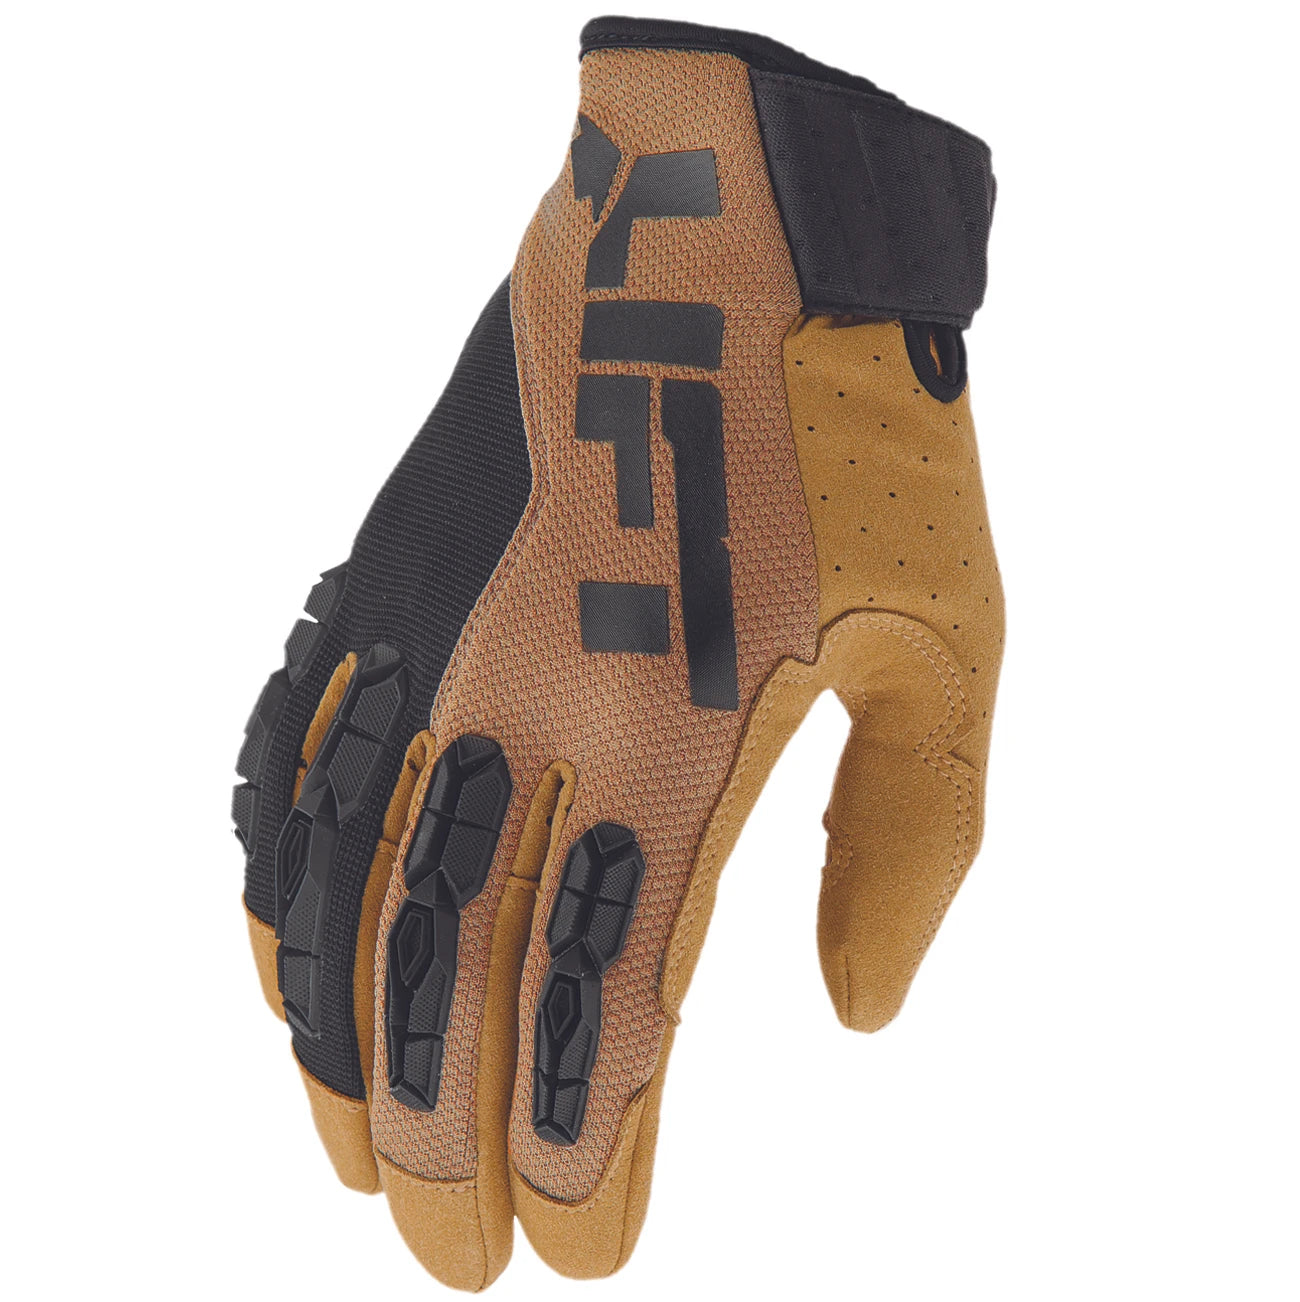 LIFT GRUNT Glove (Brown)- Synthetic Leather with TPR Guards